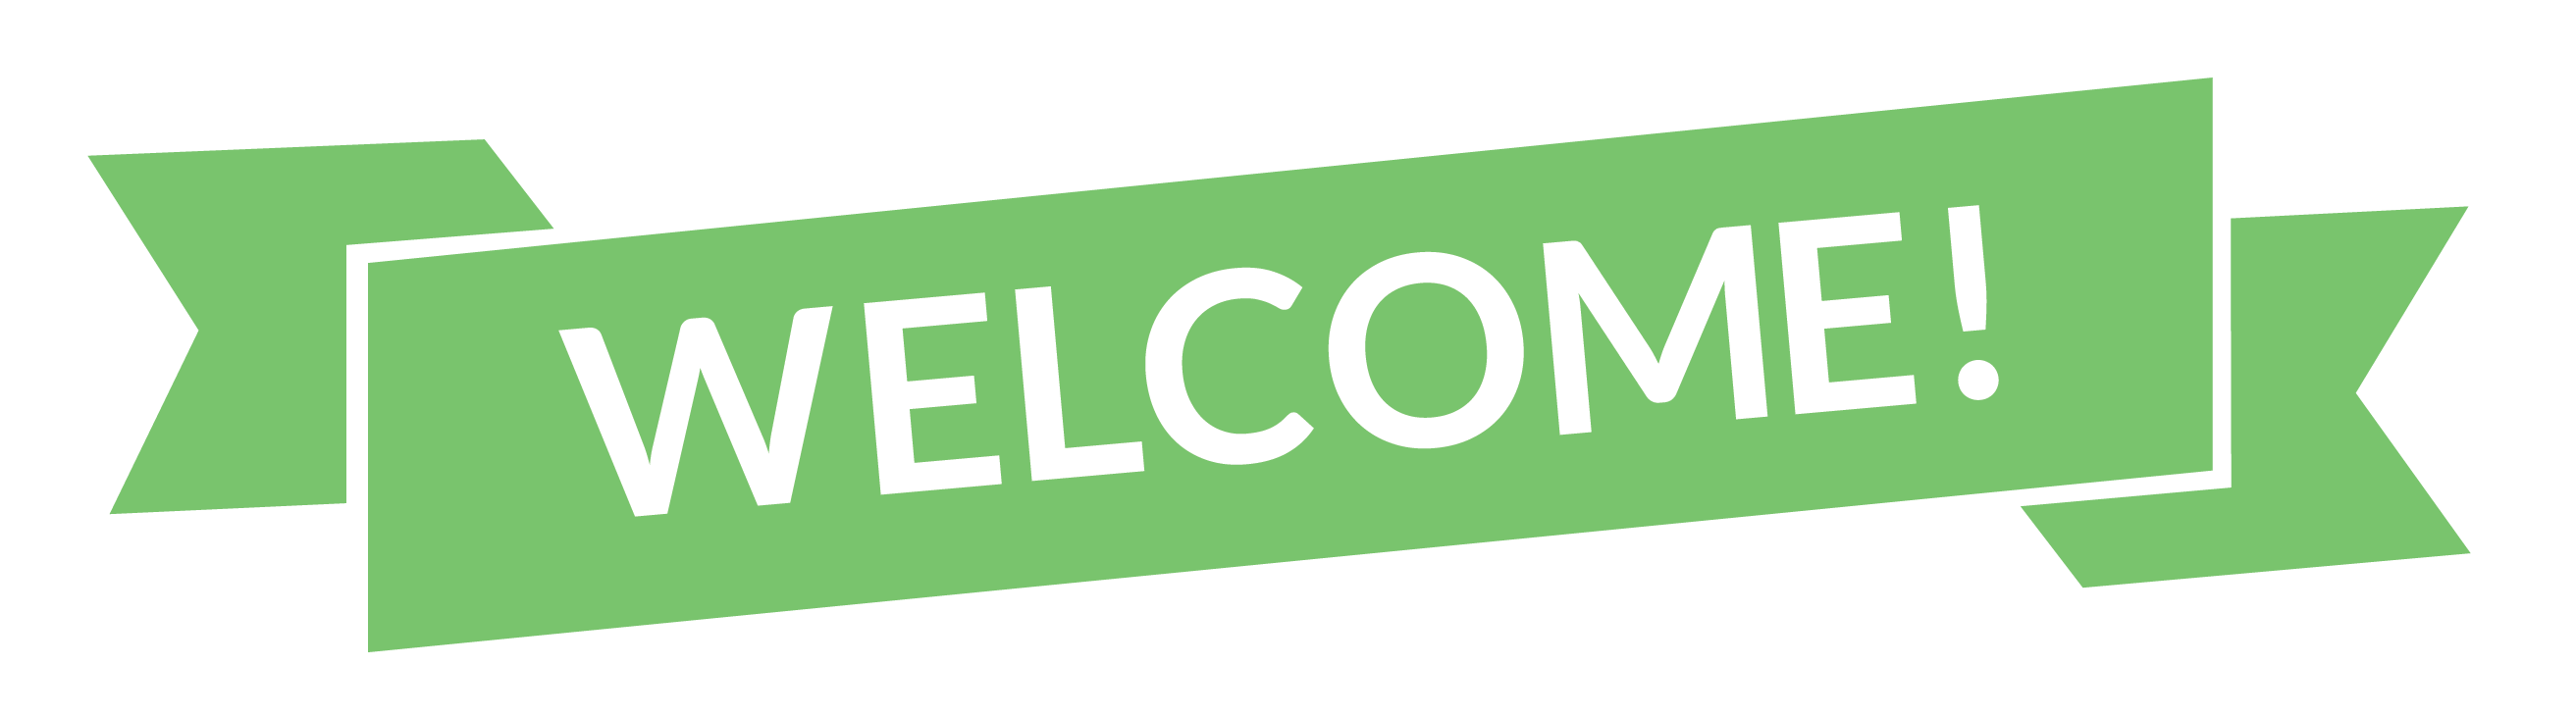 Welcome Hd PNG Image